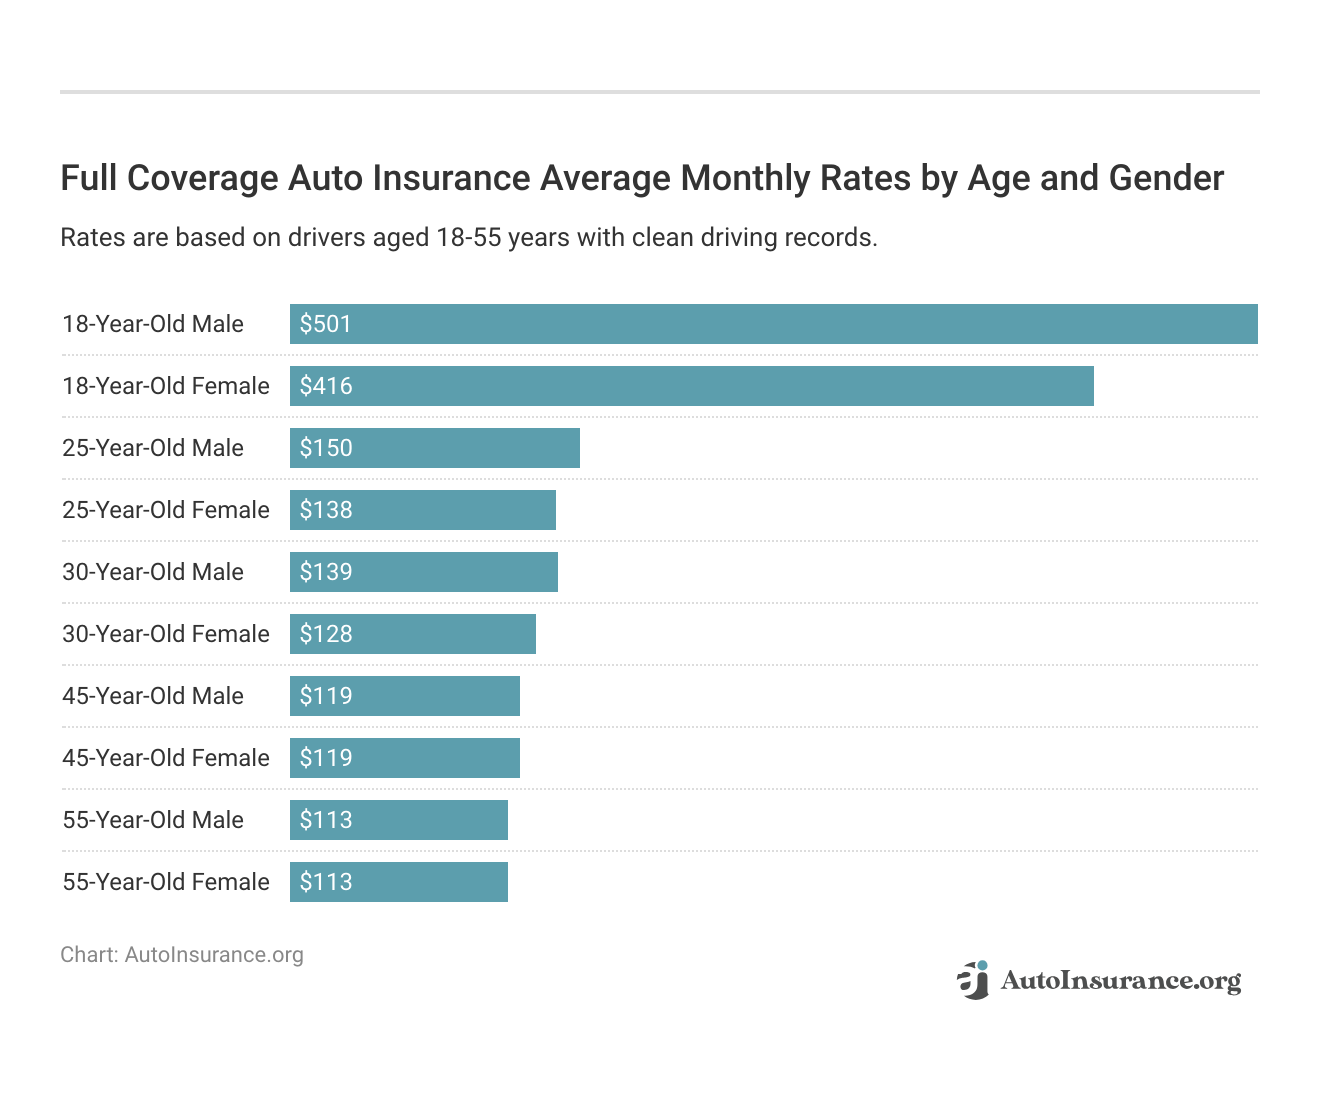 <h3>Full Coverage Auto Insurance Average Monthly Rates by Age and Gender</h3>